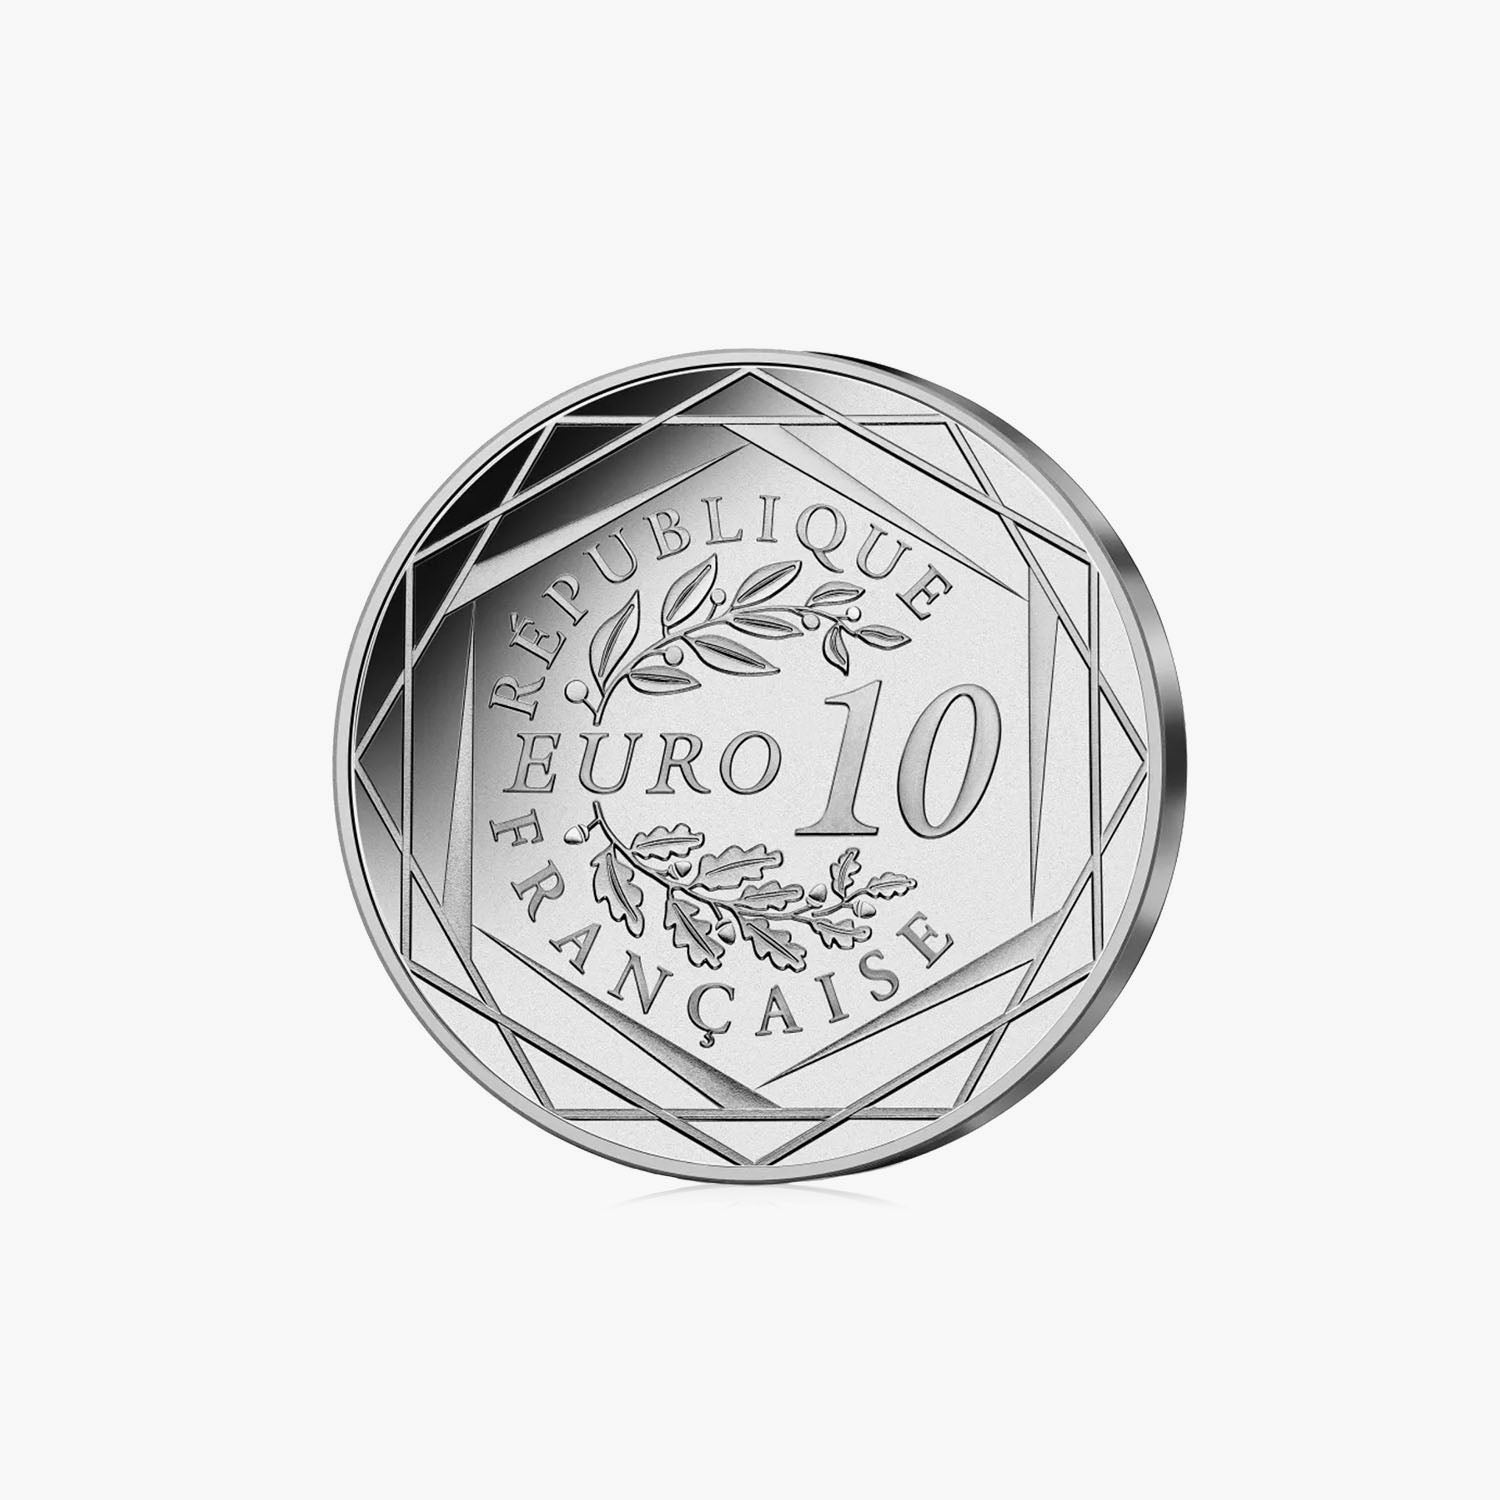 100 Year Anniversary of the 24 Hours Le Mans 10 Silver Coin